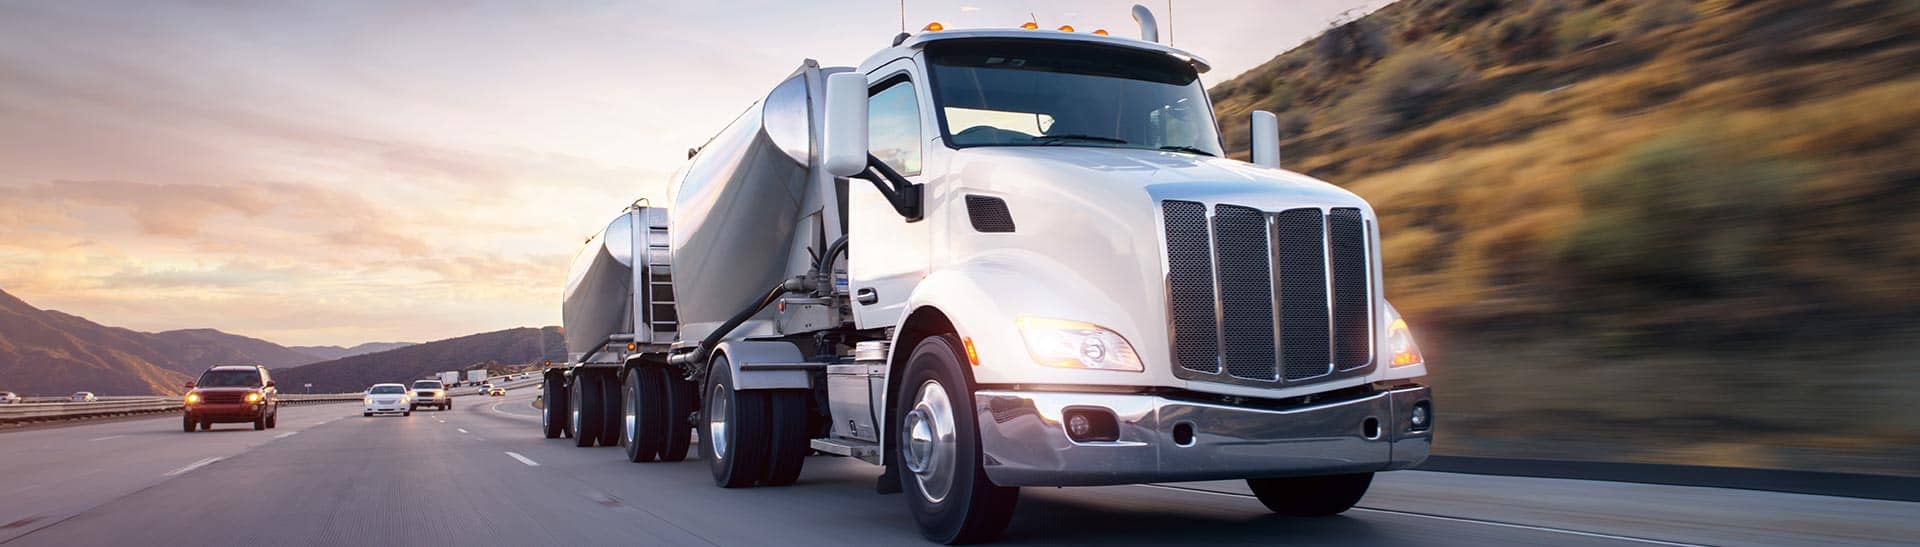 Chicago Trucking Company, Freight Forwarding Services and Long Haul Trucking